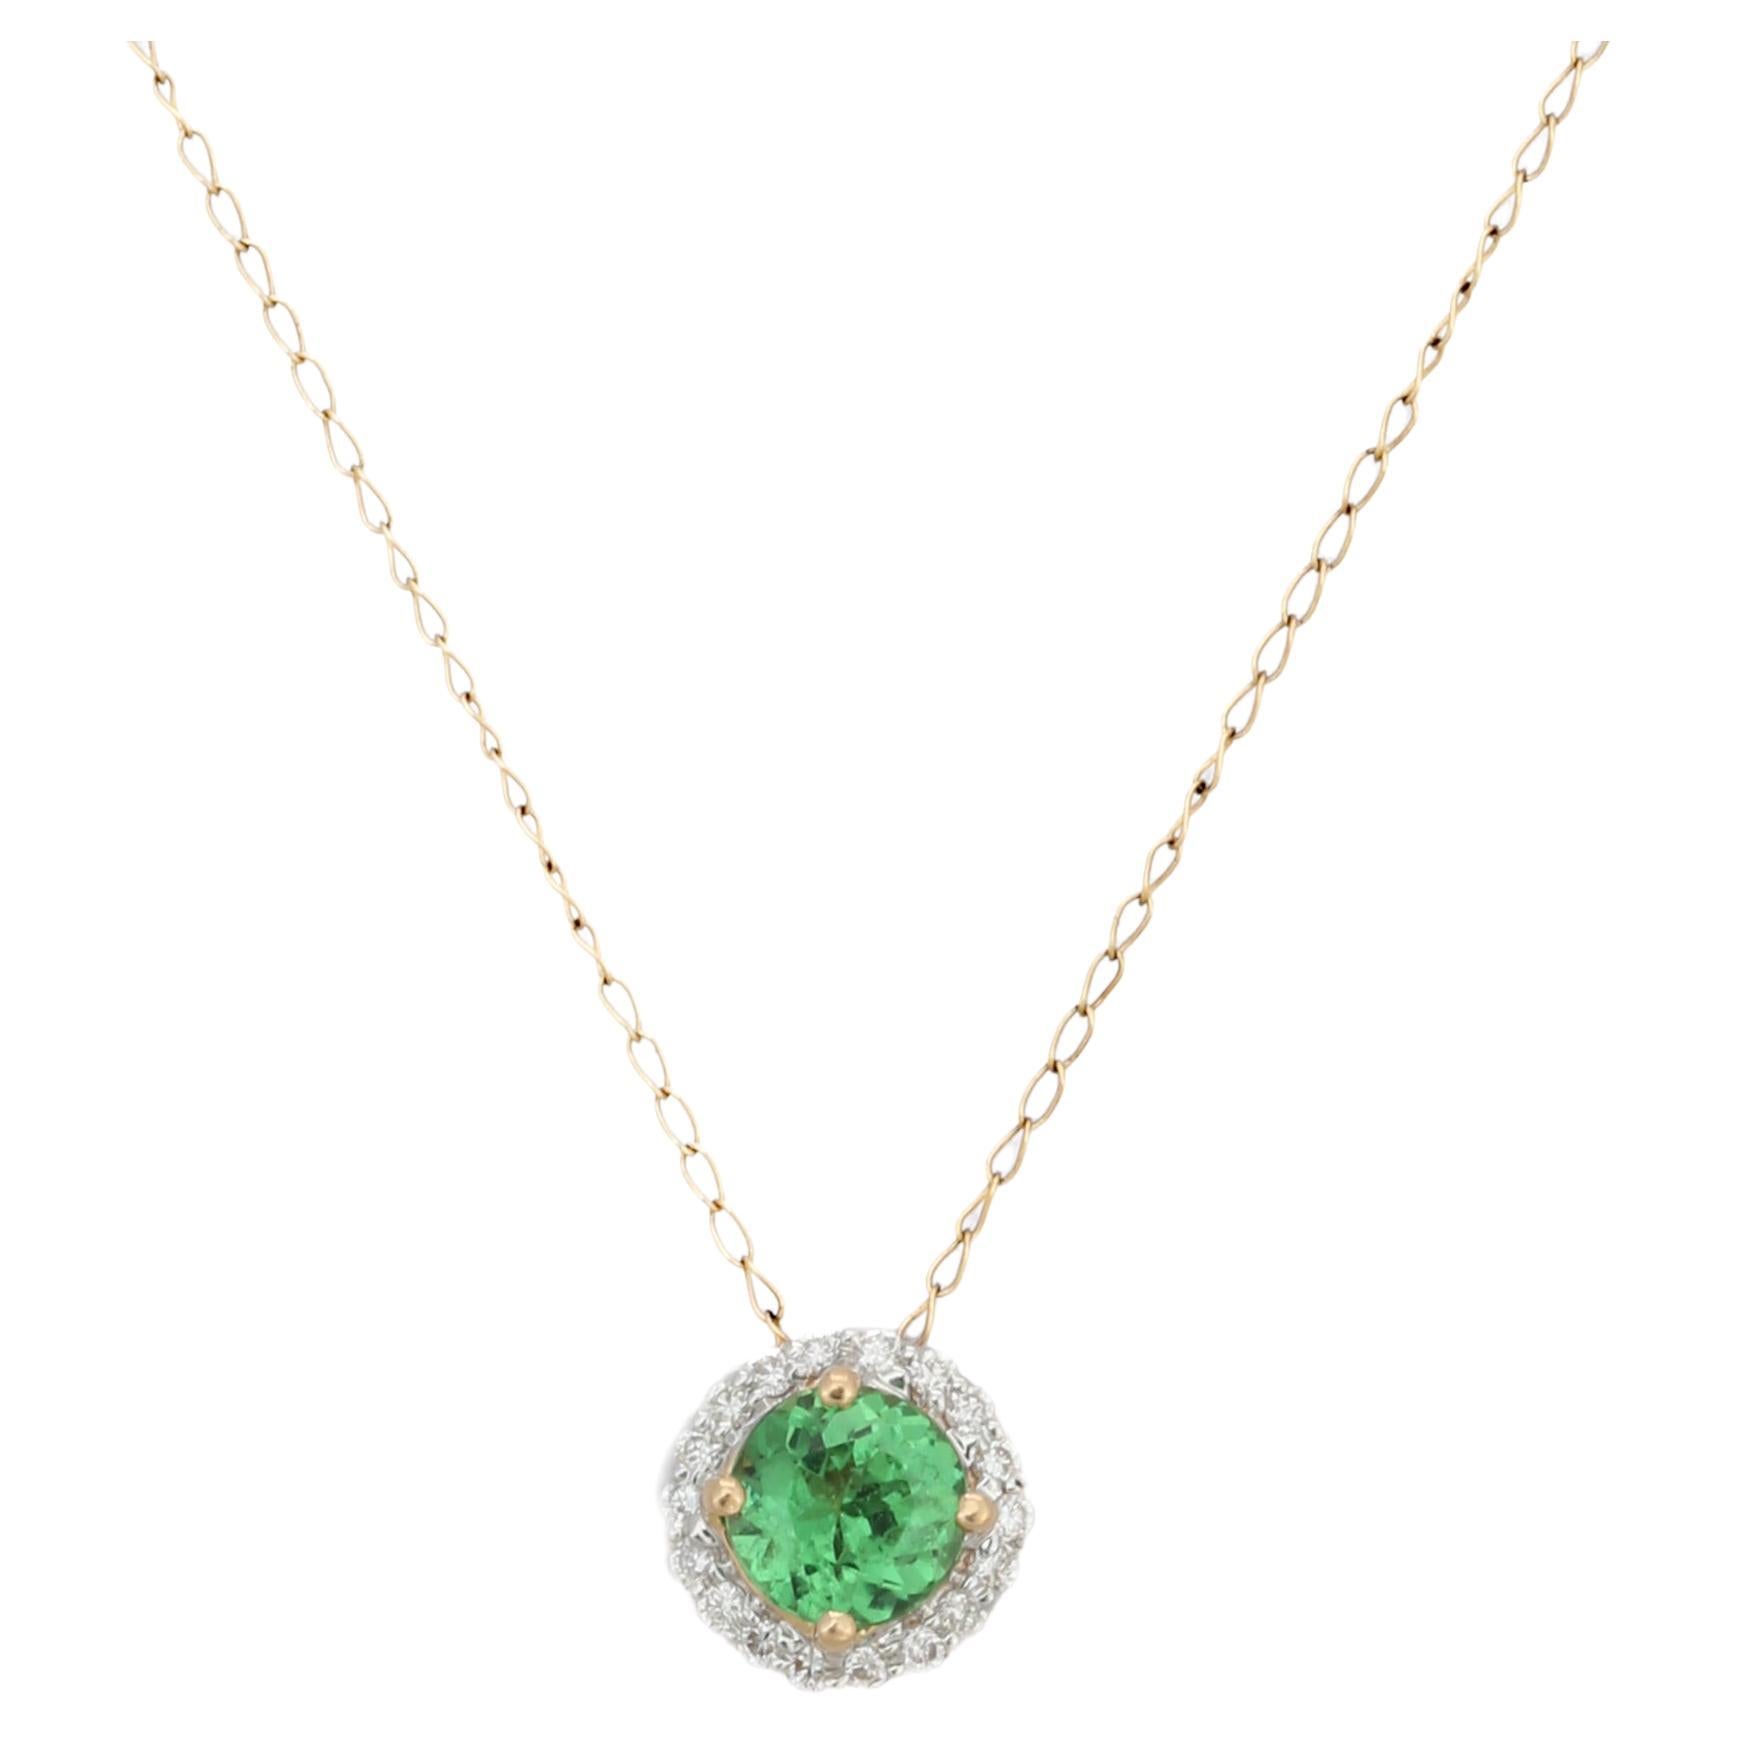 Halo Round Tsavorite Solitaire Necklace 18k Solid Yellow Gold, Gift For Her